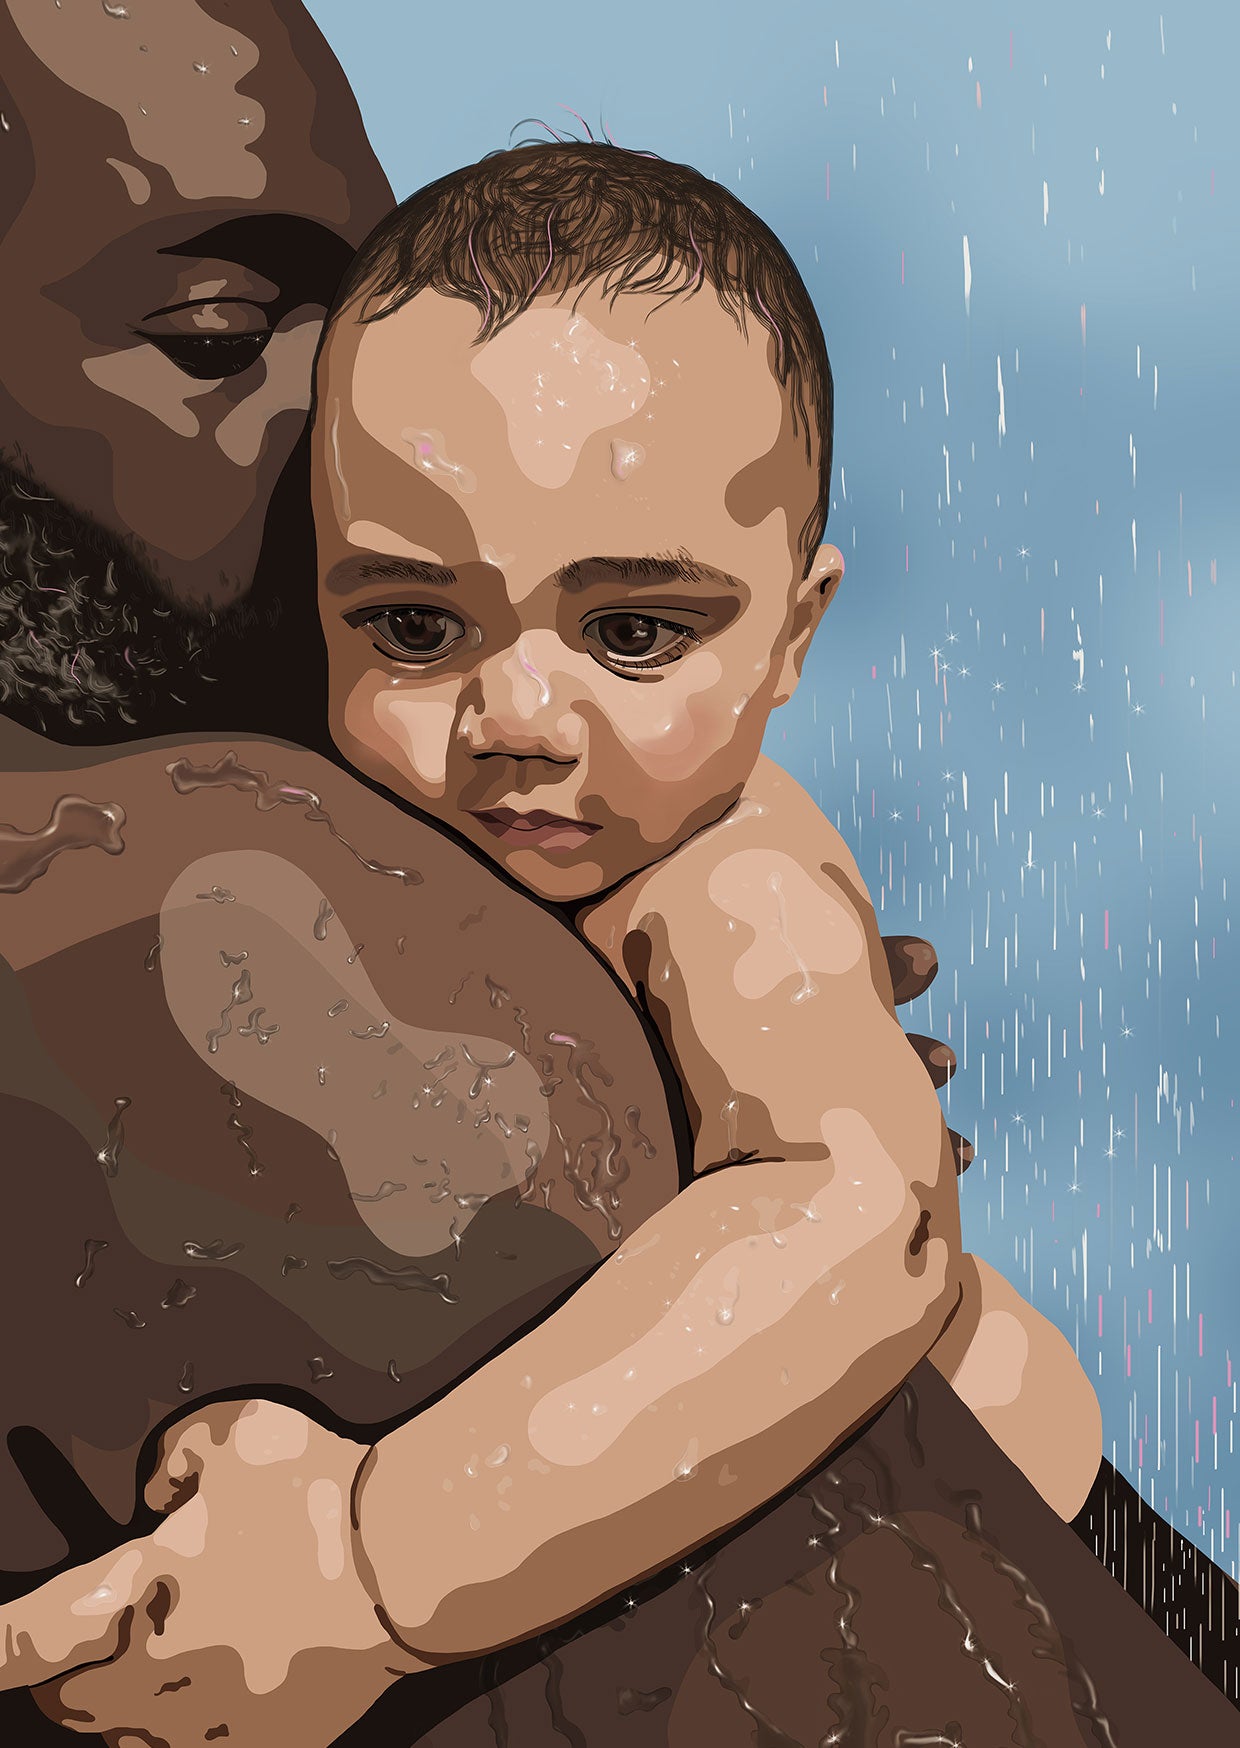 Digital portrait illustration of father holding baby son in shower